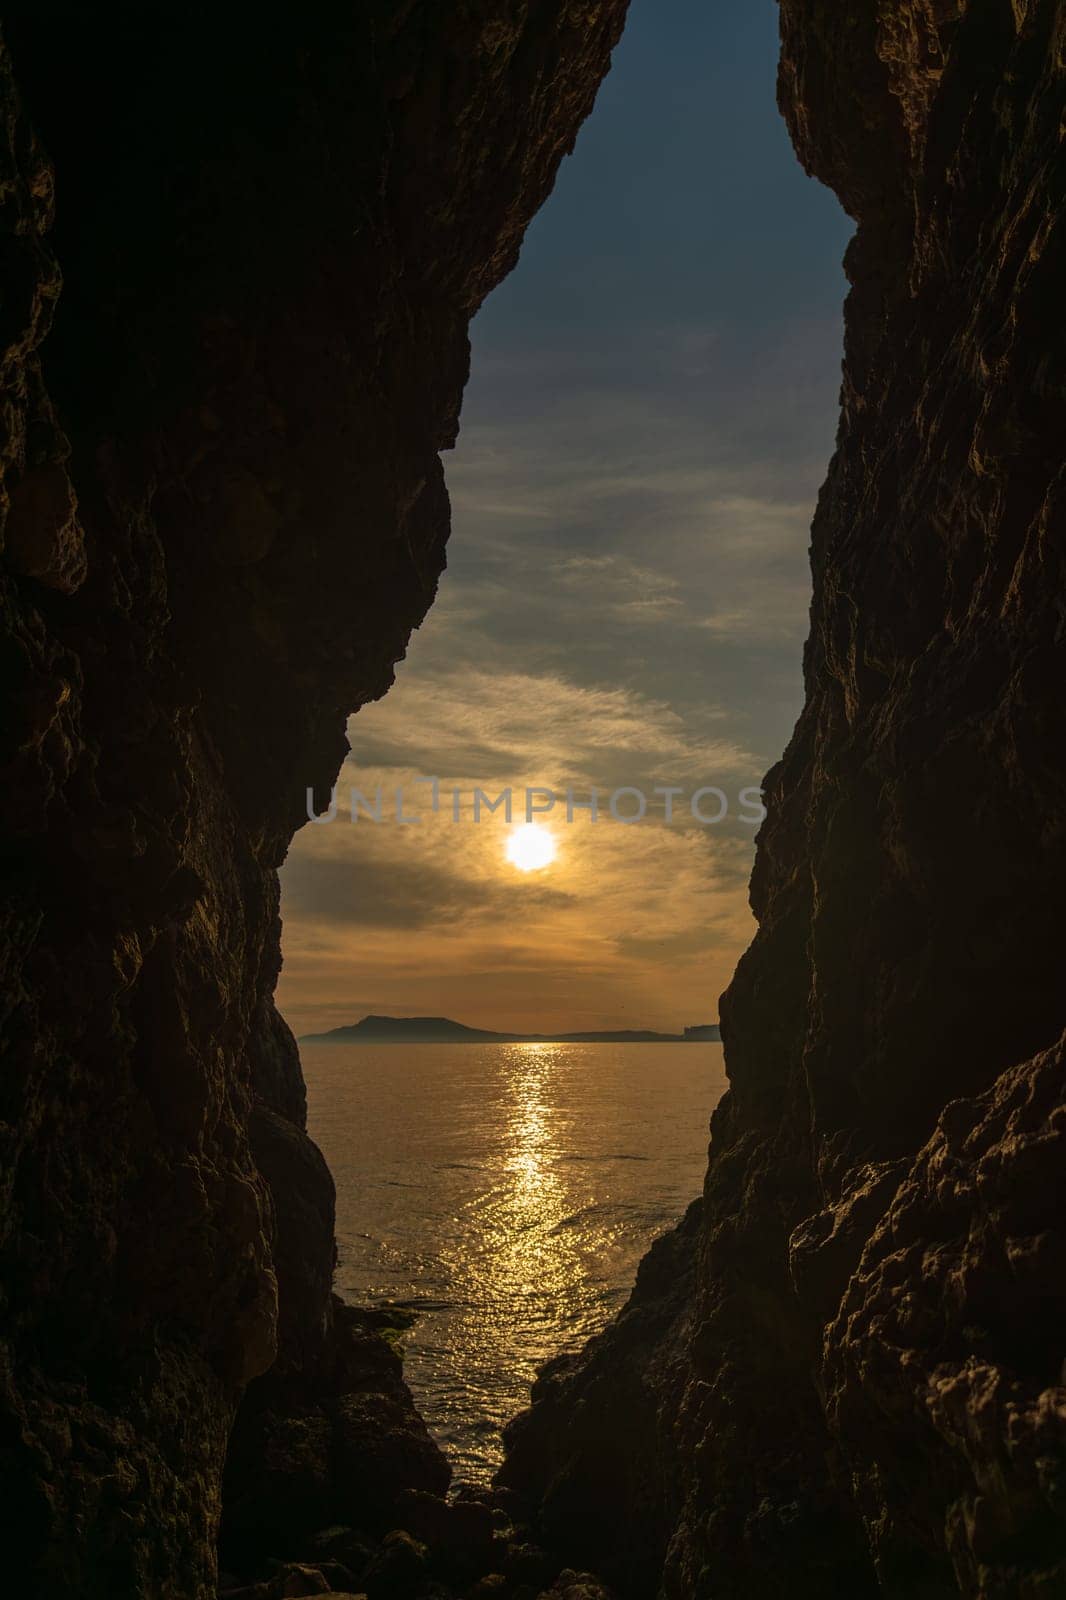 A large rock formation with a small opening in it. The sun is setting and the water is calm. by Matiunina